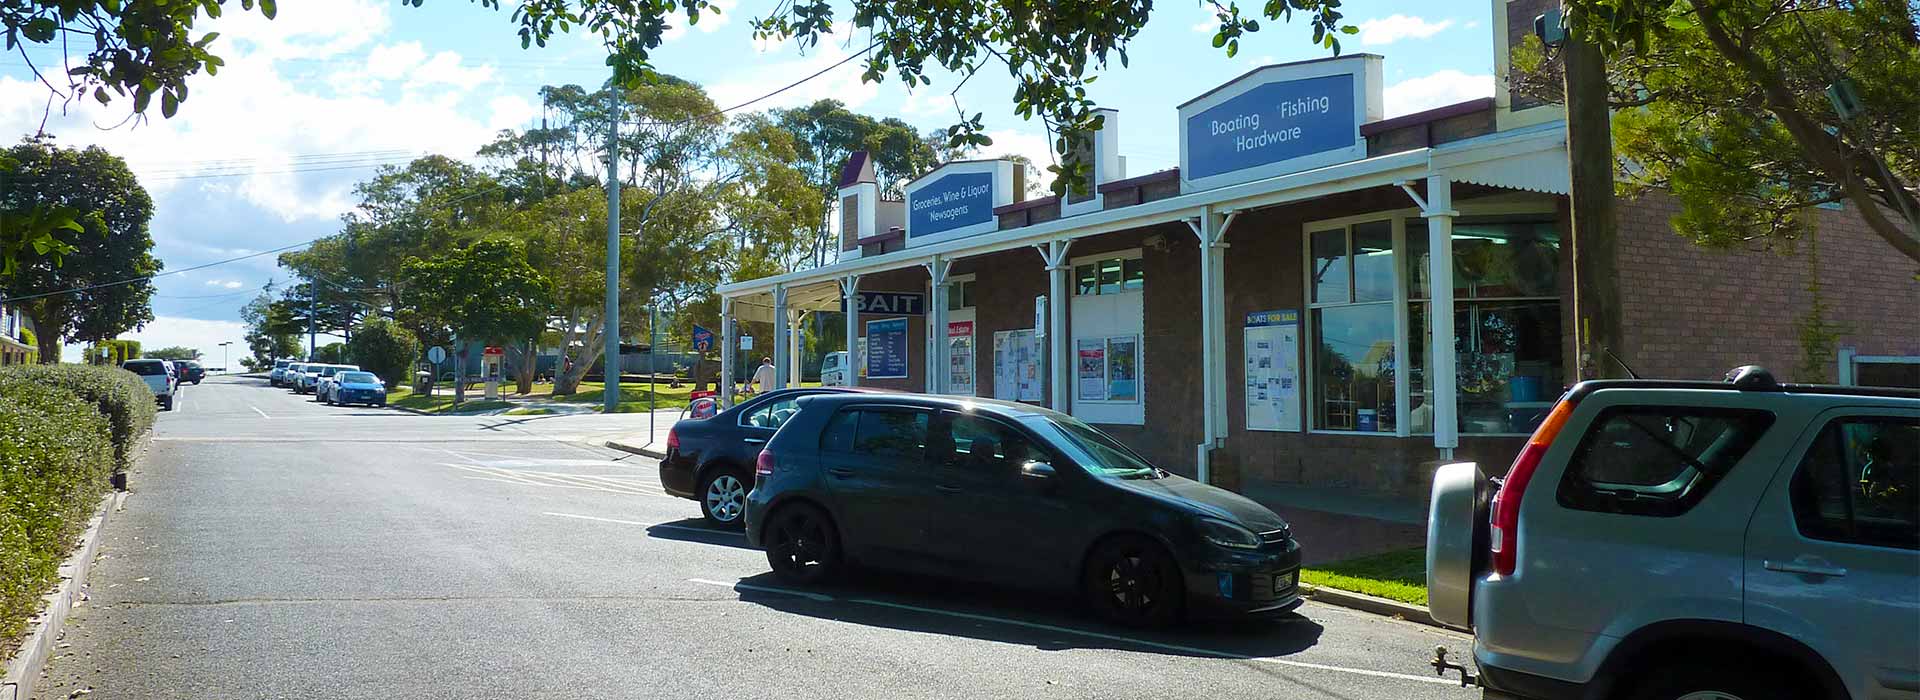 Metung Village Store in the heart of the Gippsland Lakes holiday region